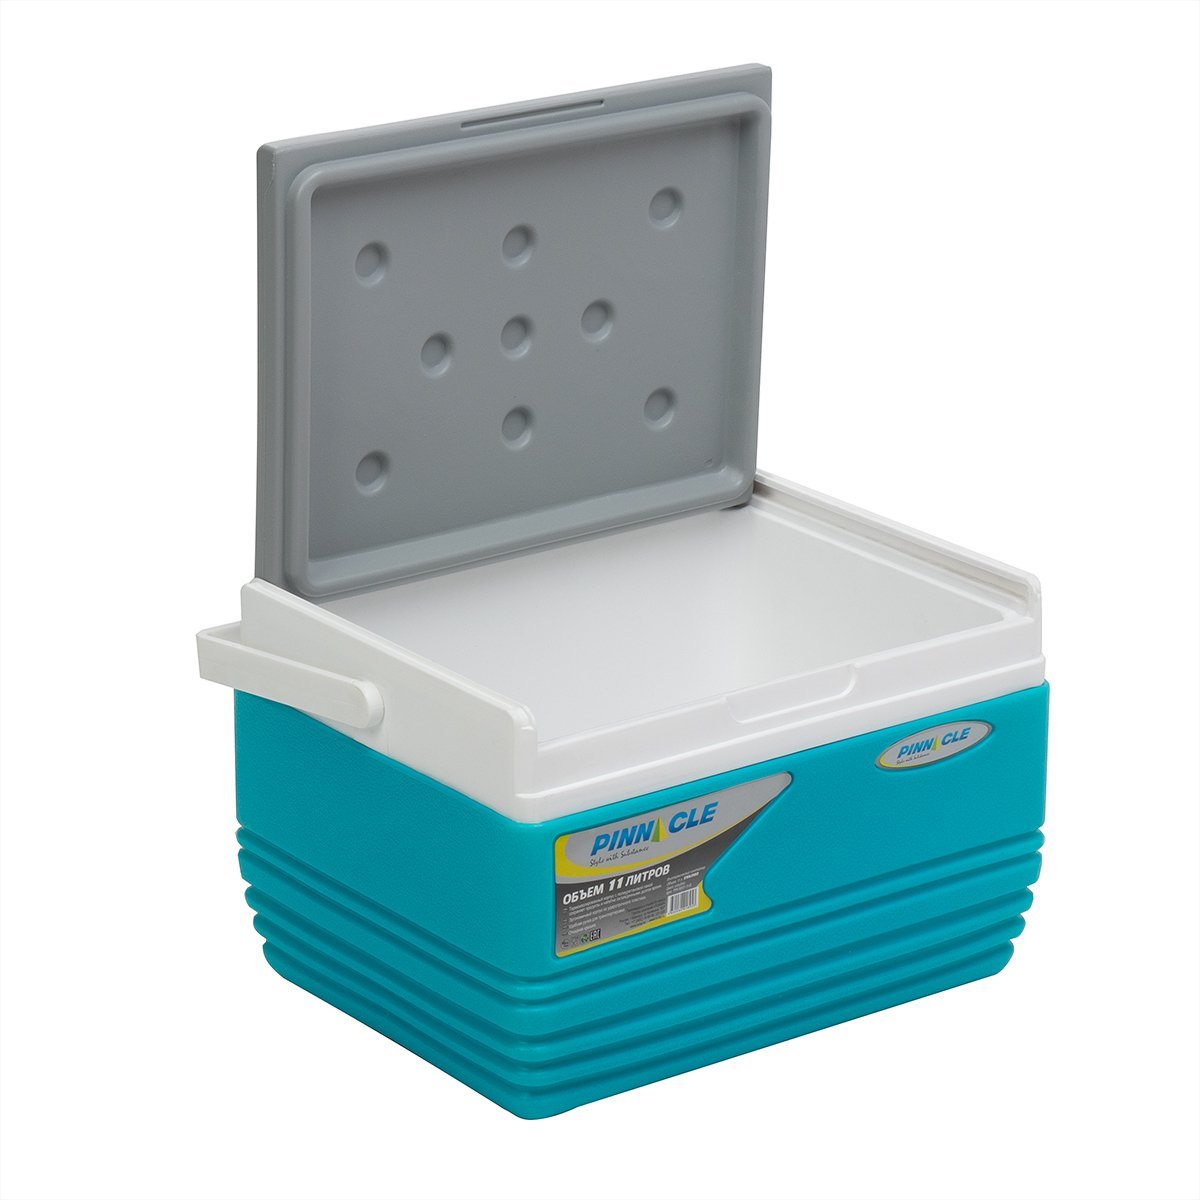 Eskimo Portable Hard-Sided Ice Chest for Camping, 11 qt, Blue with a lid widely open